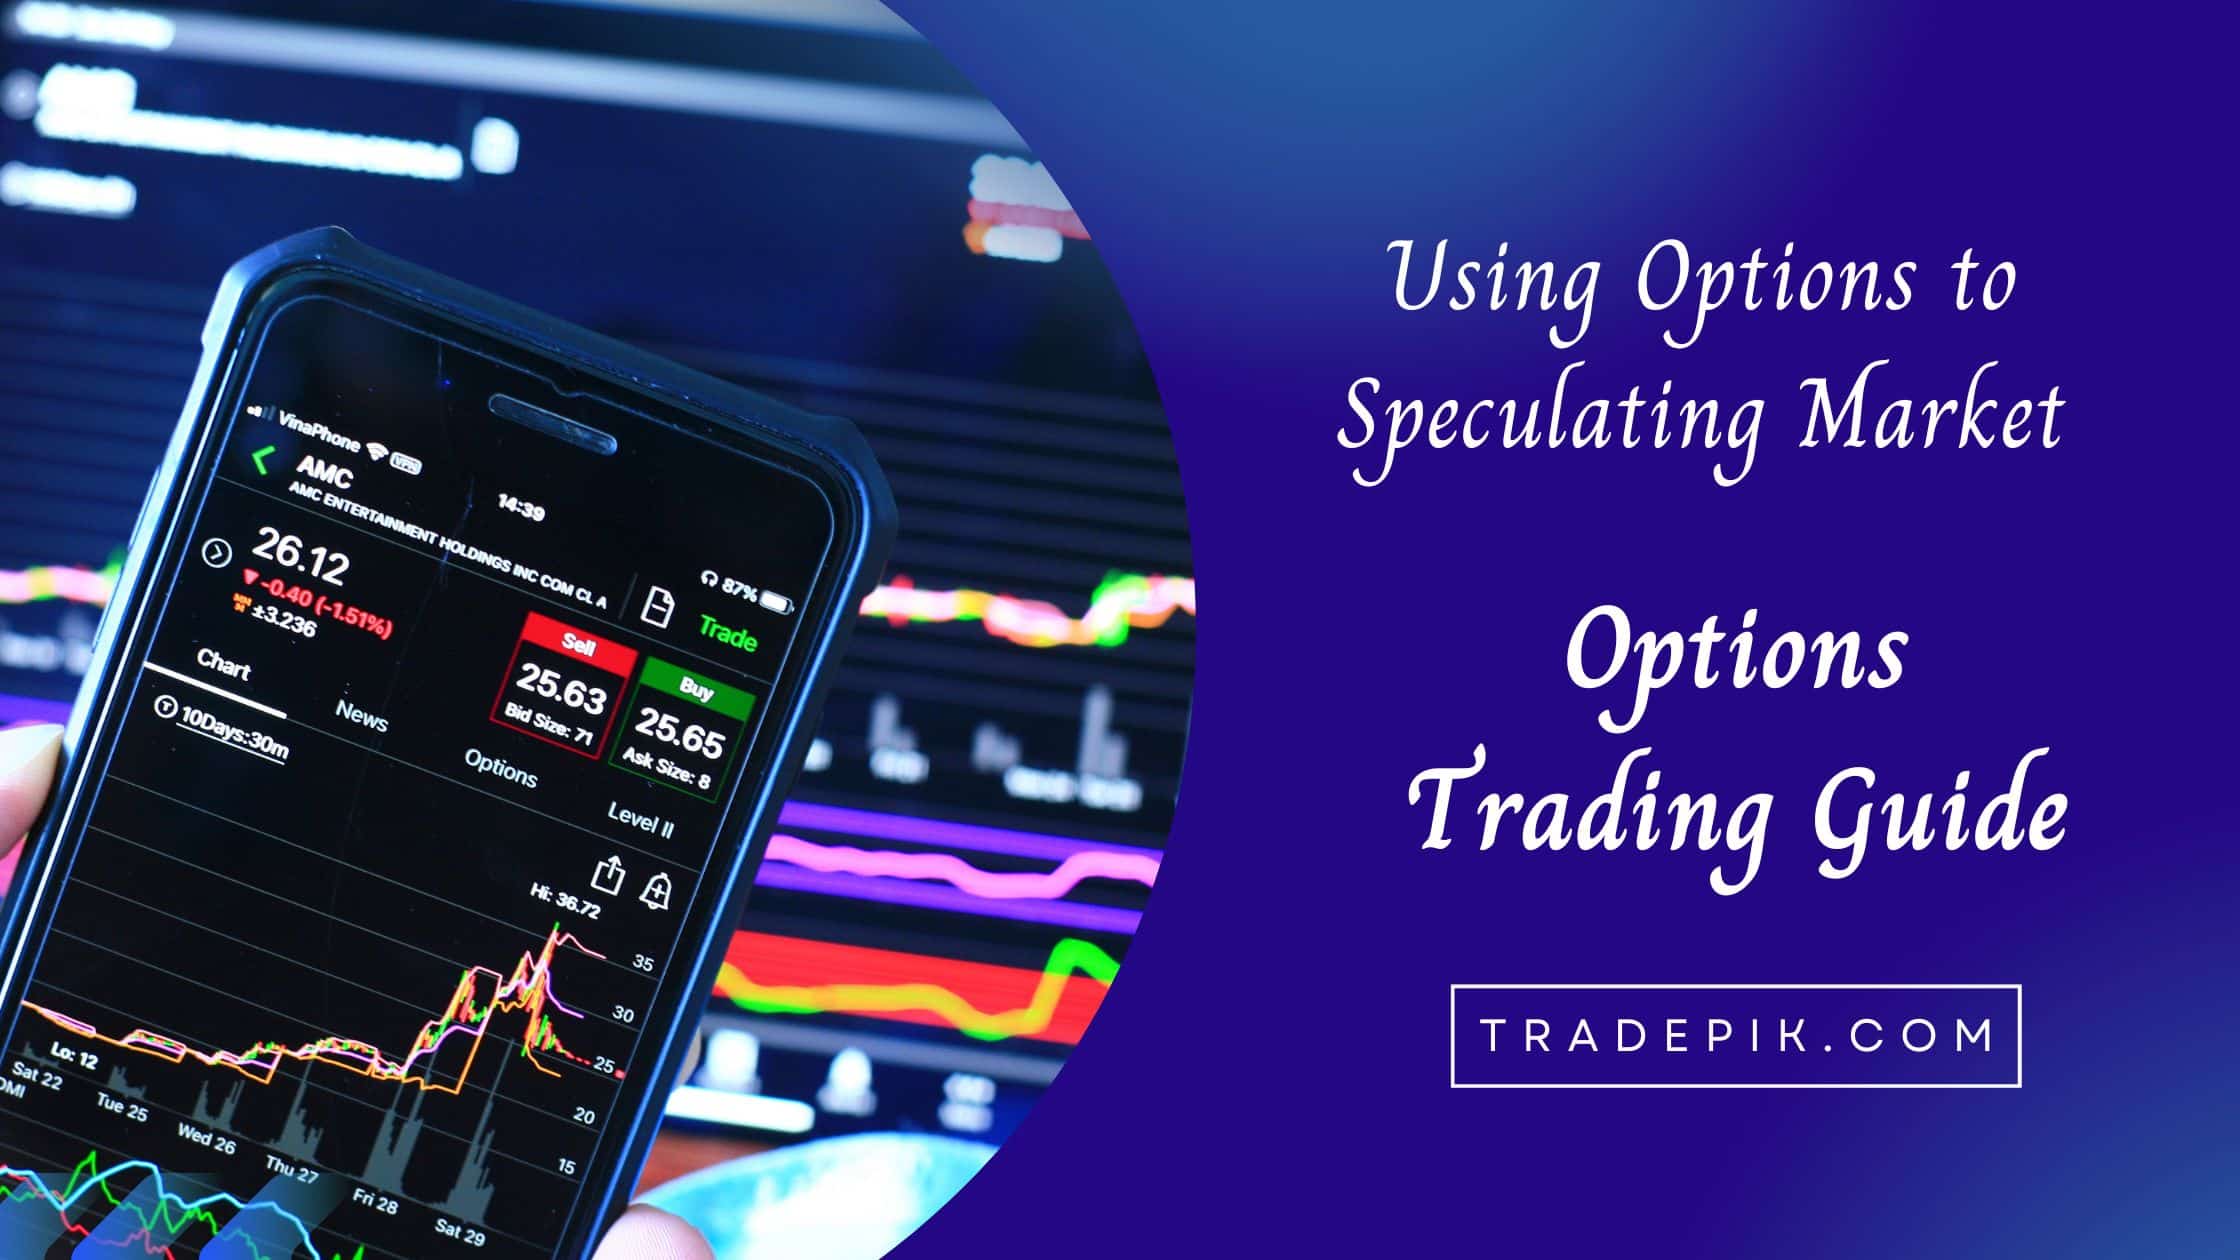 How to Use Options to Speculate on the Market?